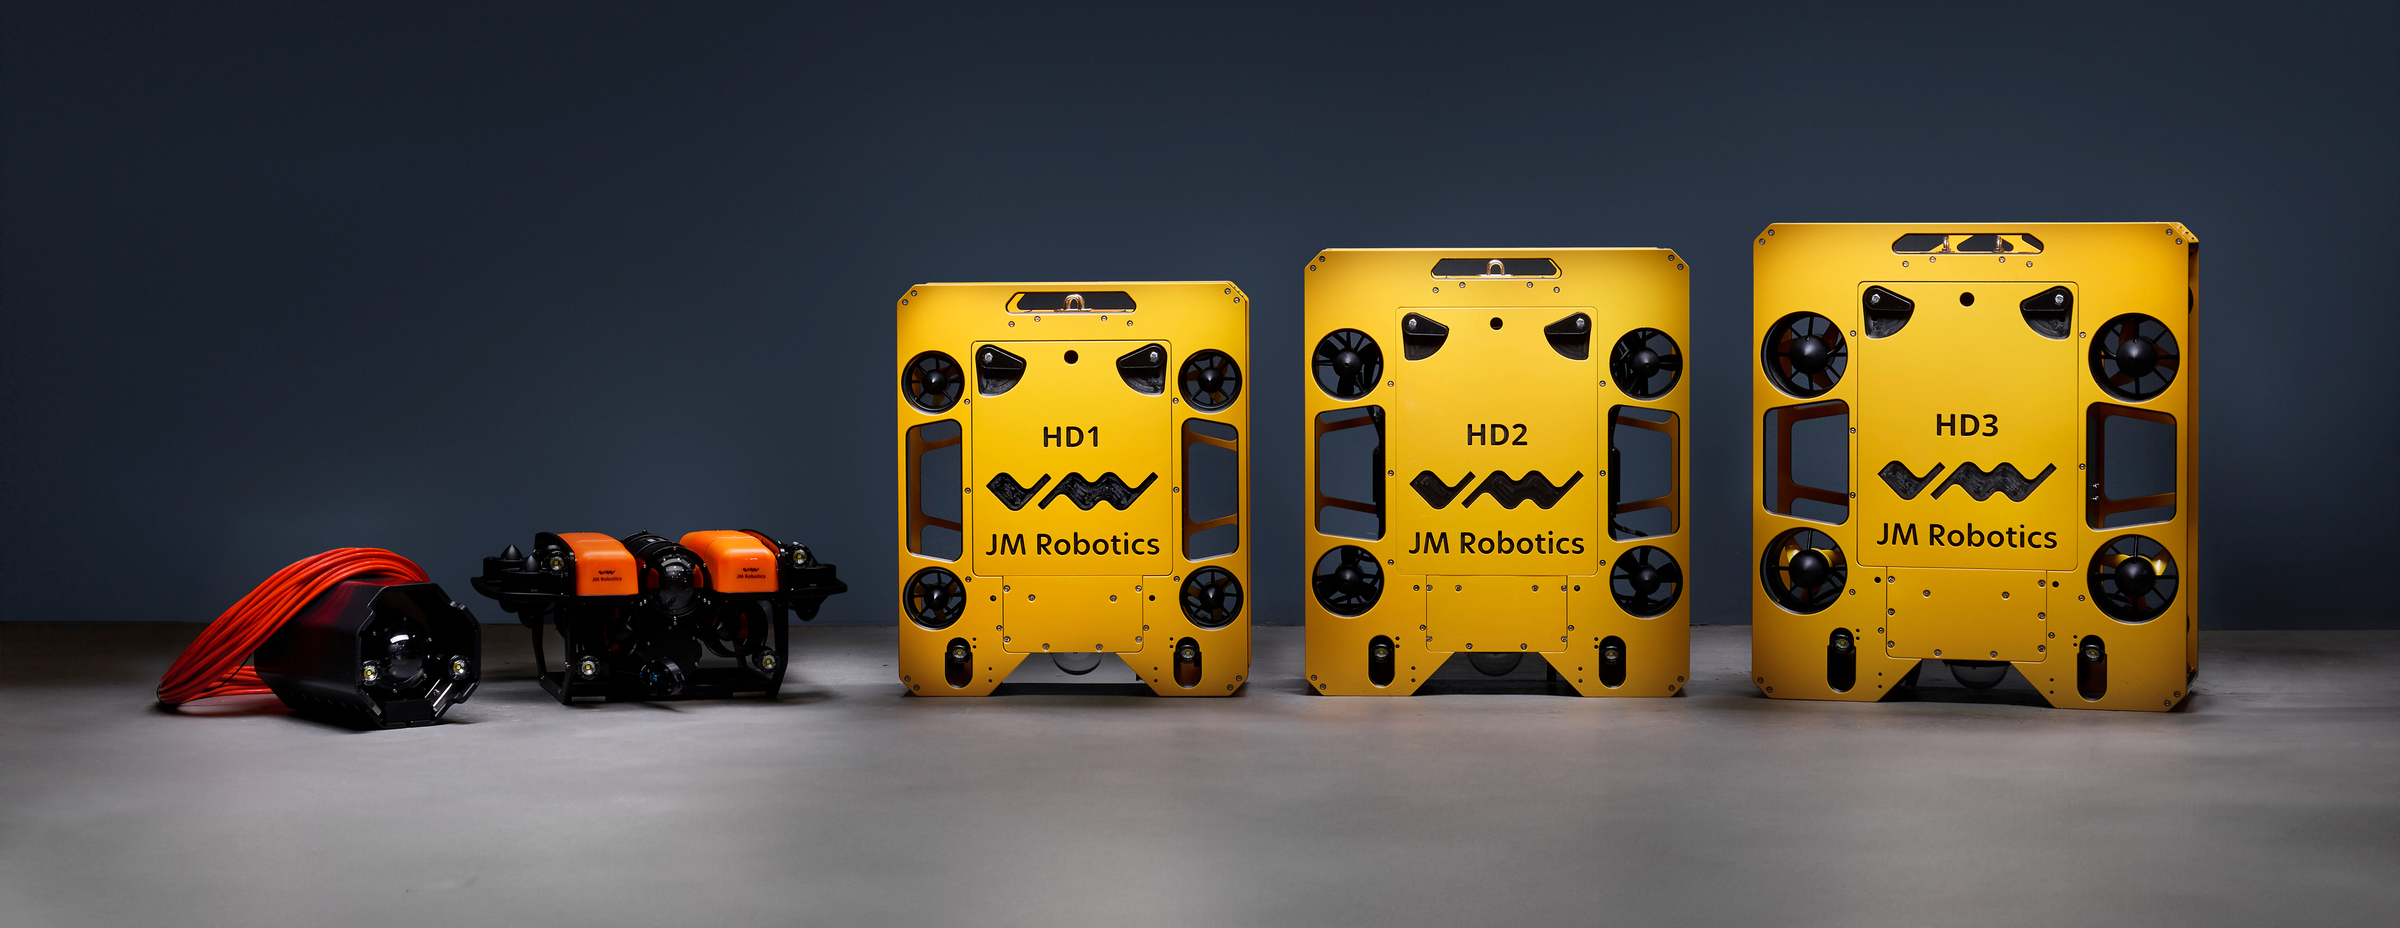 Mini ROV makes waves in subsea inspections